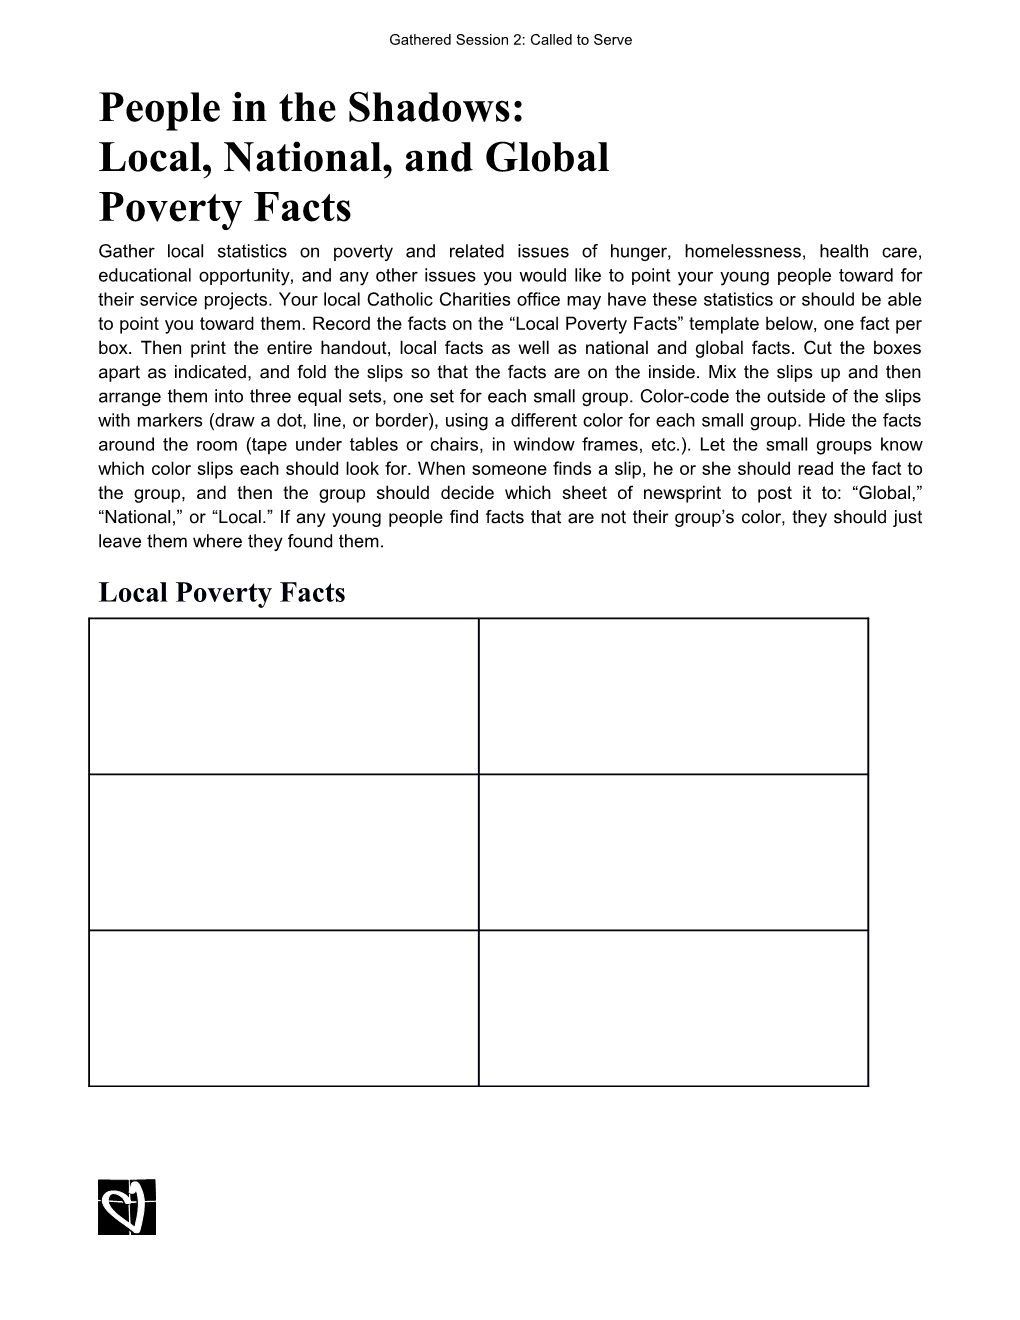 People in the Shadows: Local, National, and Global Poverty Facts